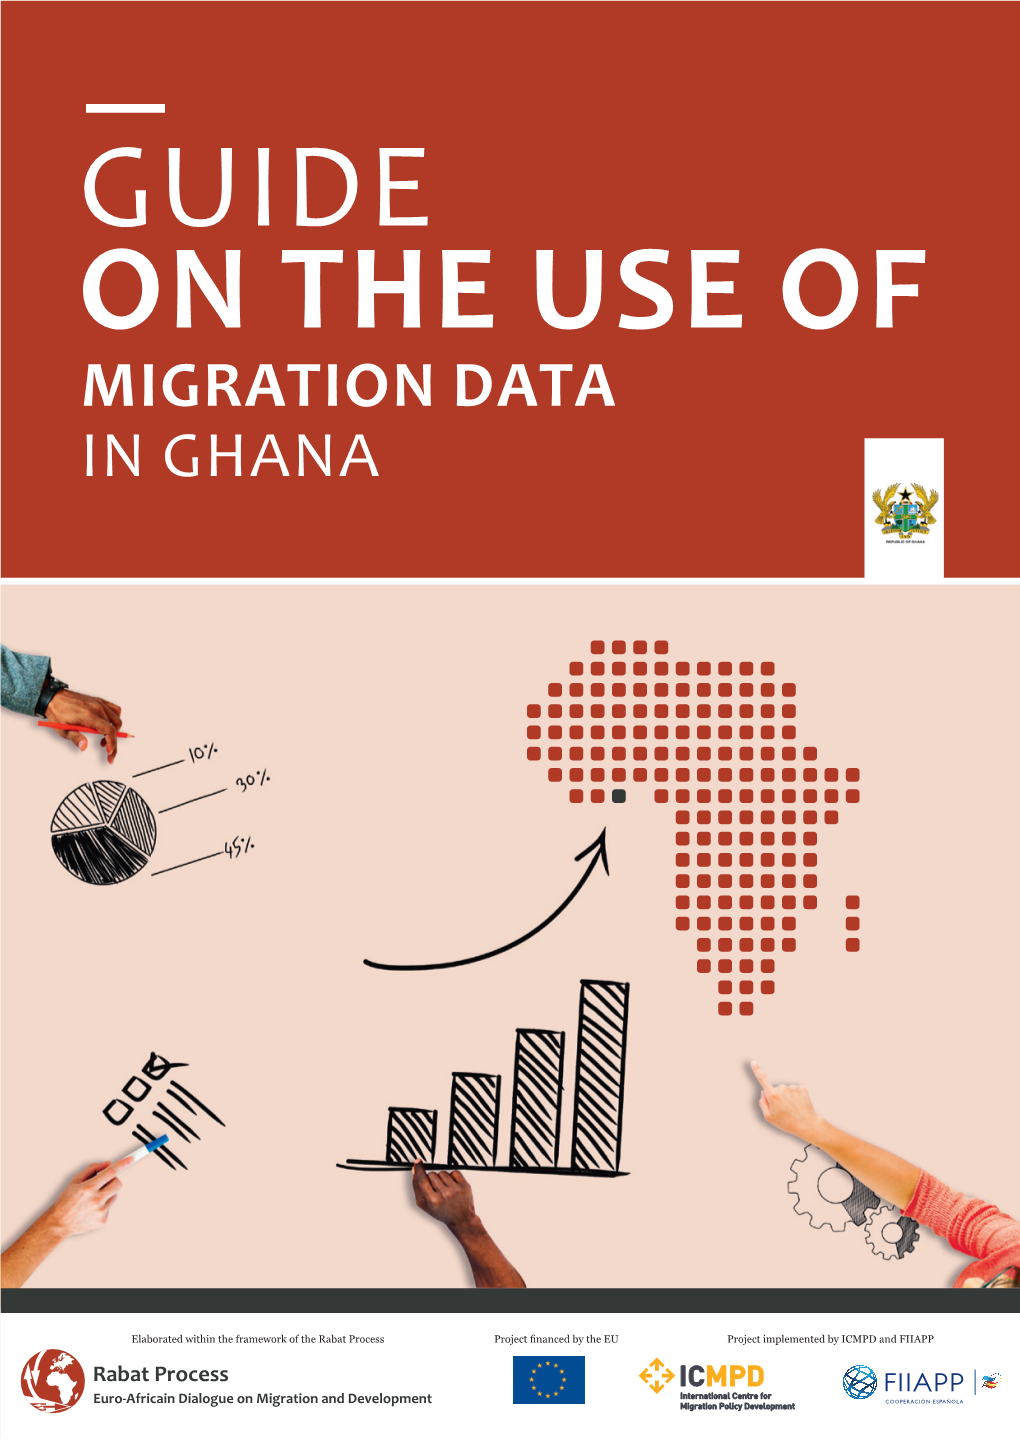 Guide on the Use of Migration Data in Ghana